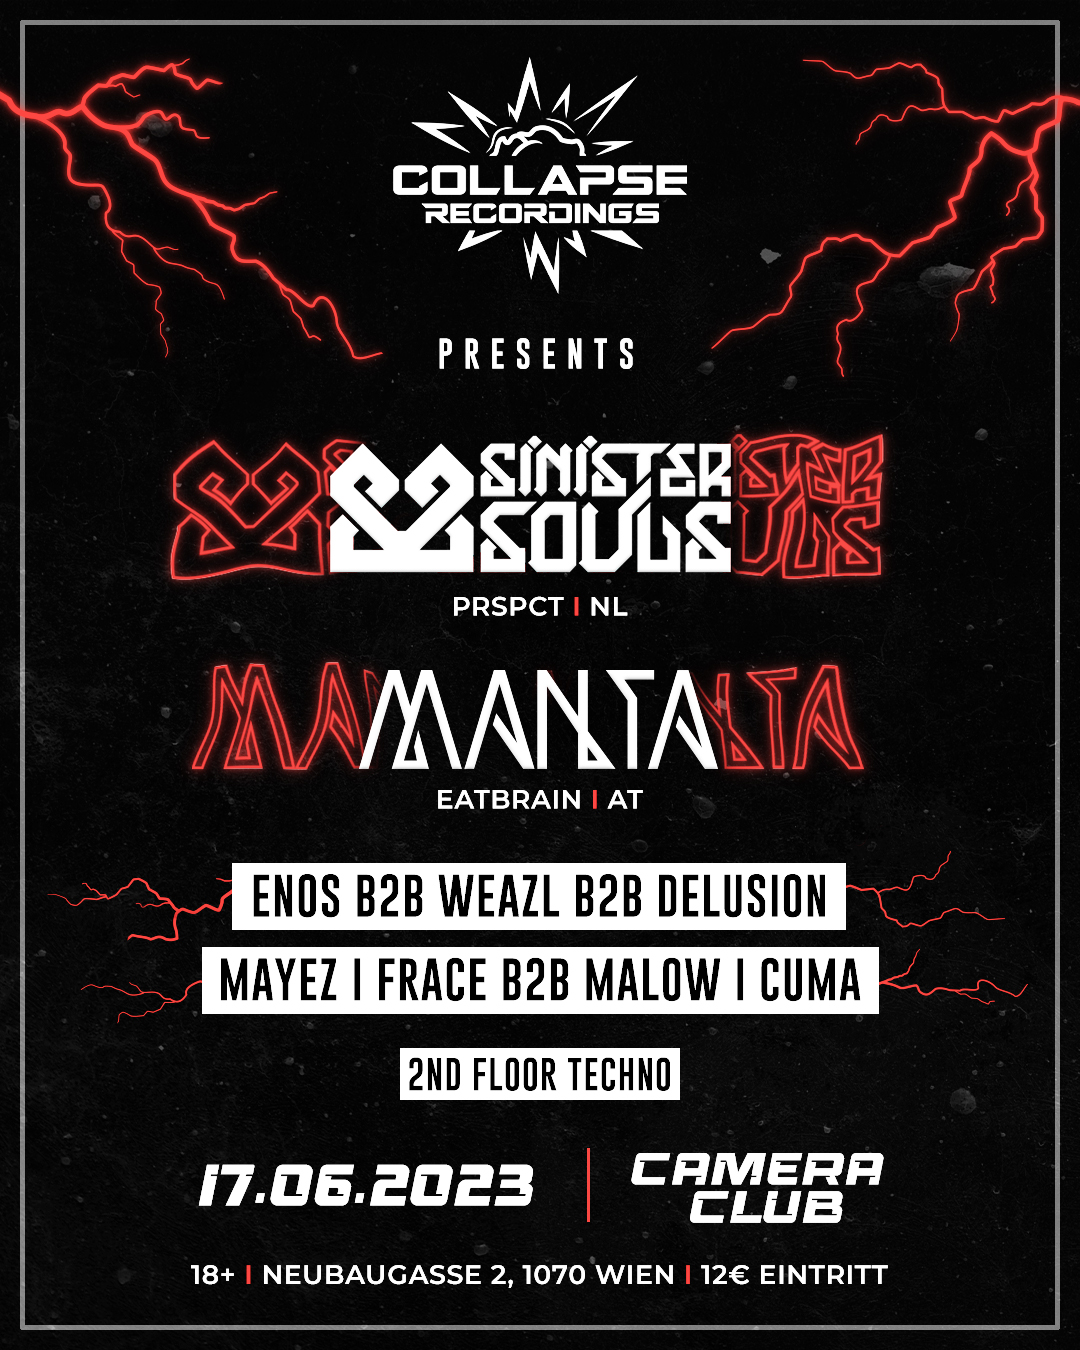 COLLAPSE presents Sinister Souls & Manta am 17. June 2023 @ Camera Club.